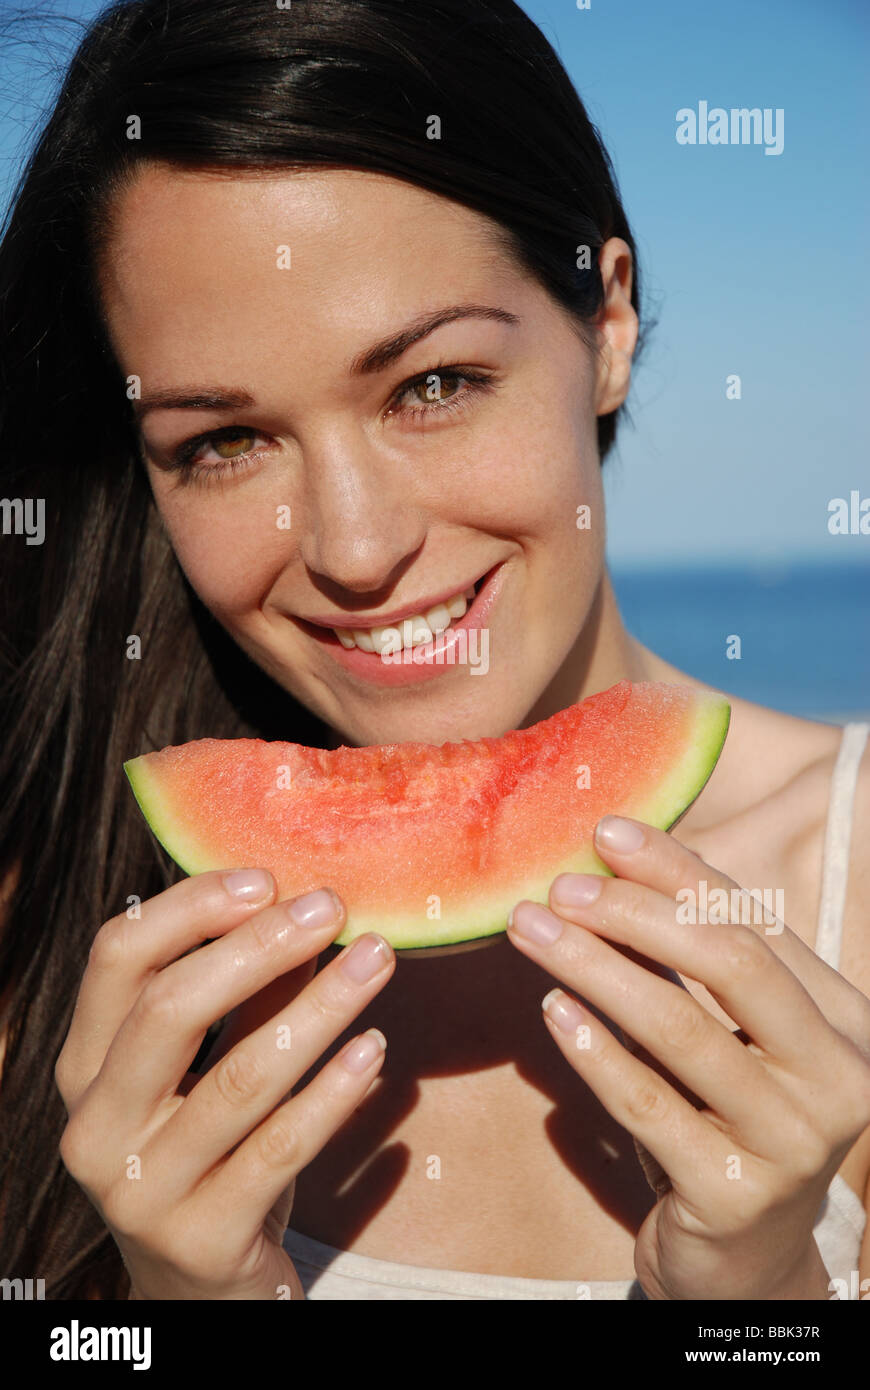 Young lady eating a piece of watermelon Stock Photo